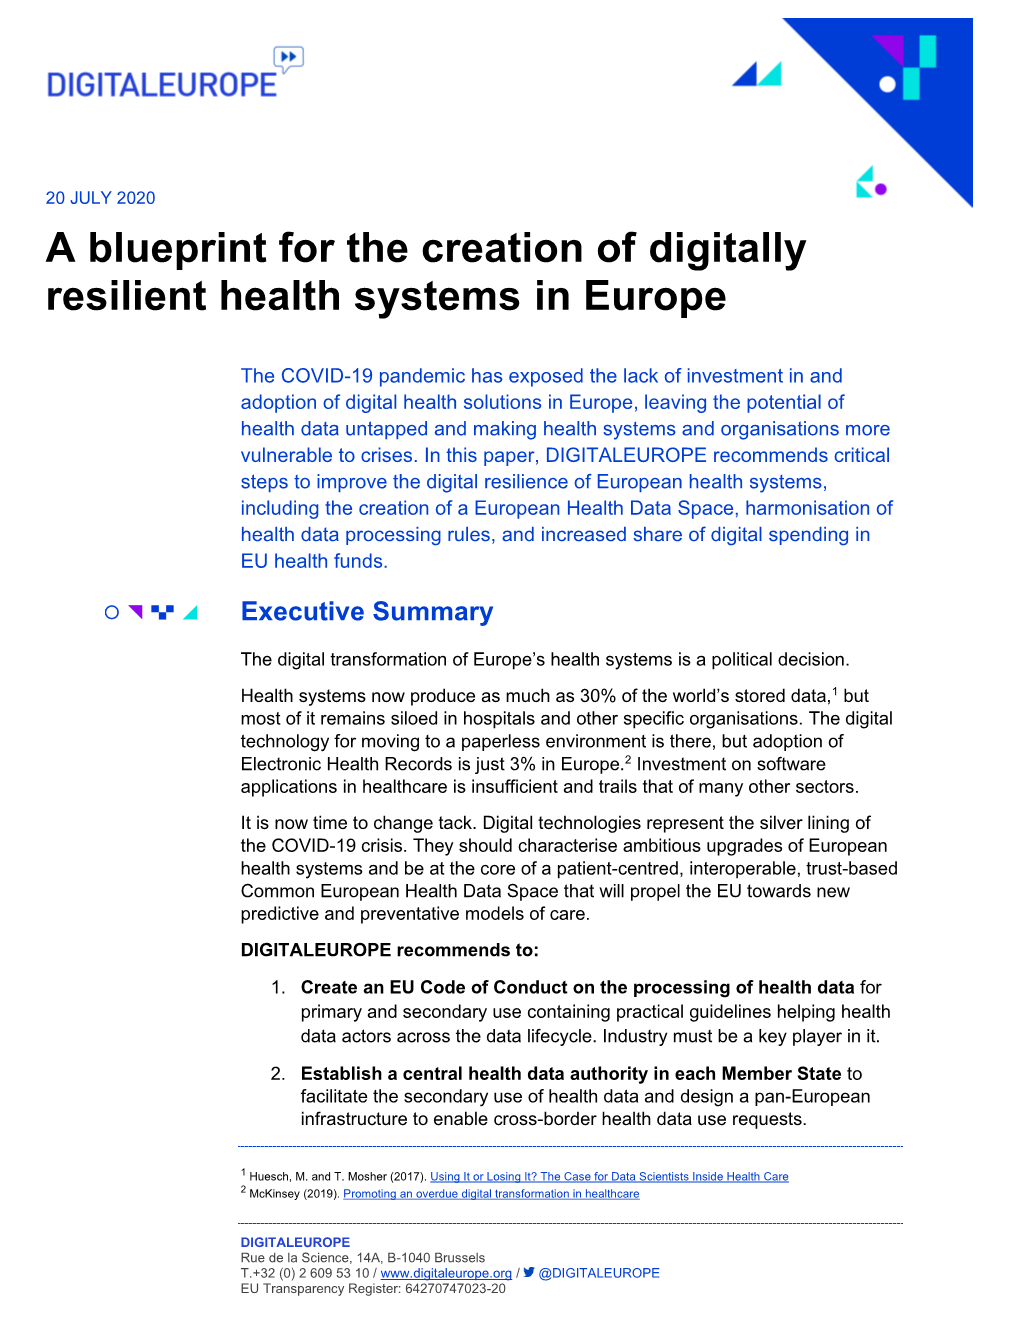 A Blueprint for the Creation of Digitally Resilient Health Systems in Europe